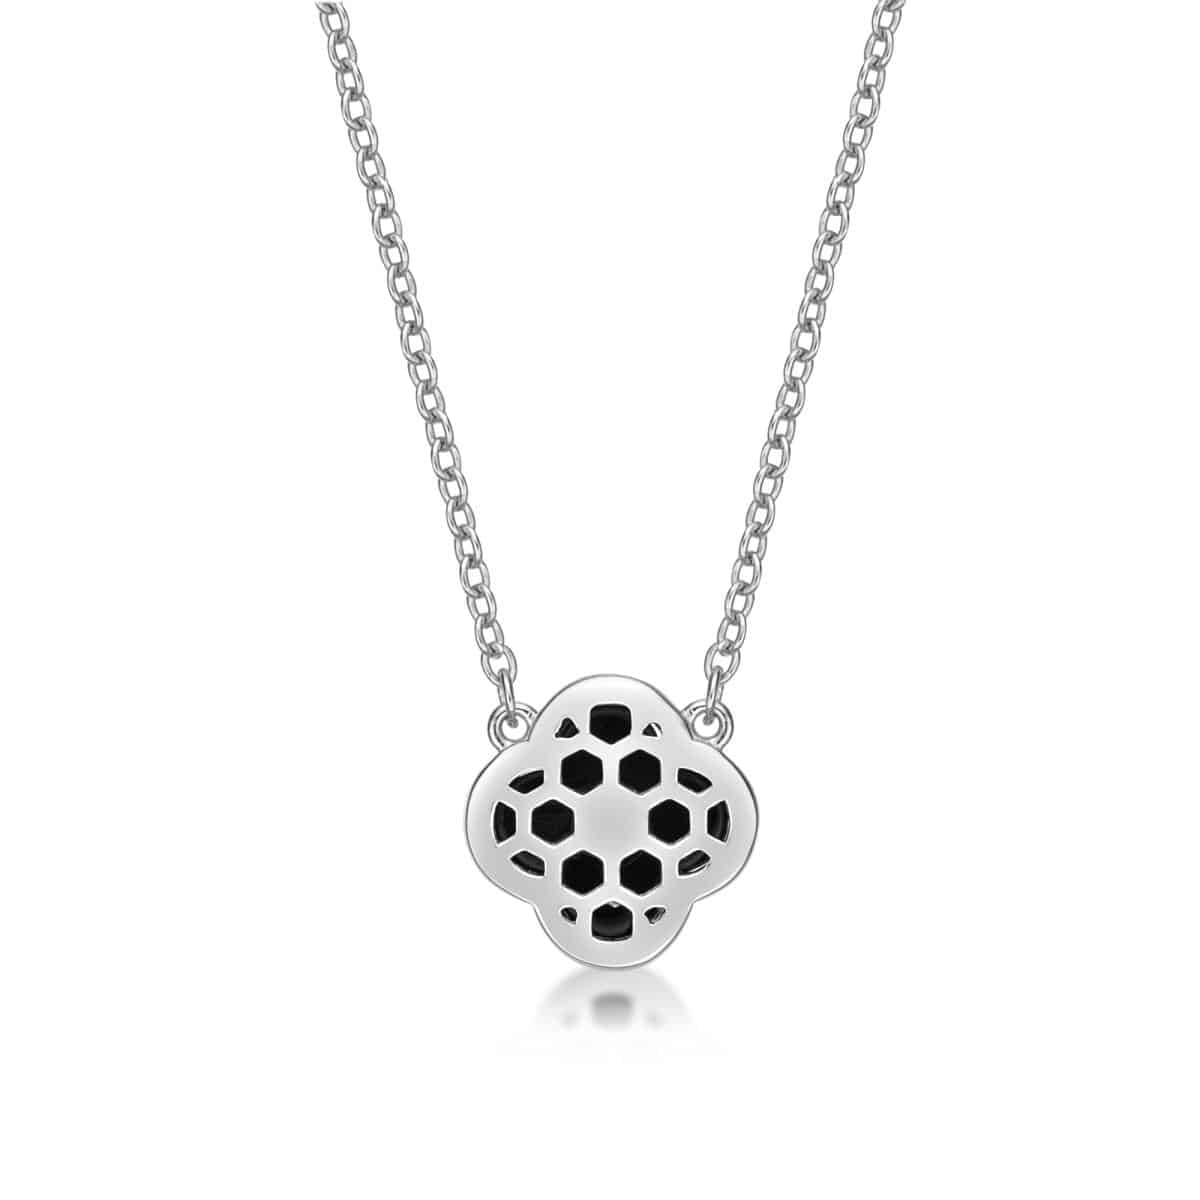 Black Onyx and Cubic Zirconia Flower Pendant Necklace in 925 Sterling Silver with 18 Inch Adjustable Cable Chain Spring Ring